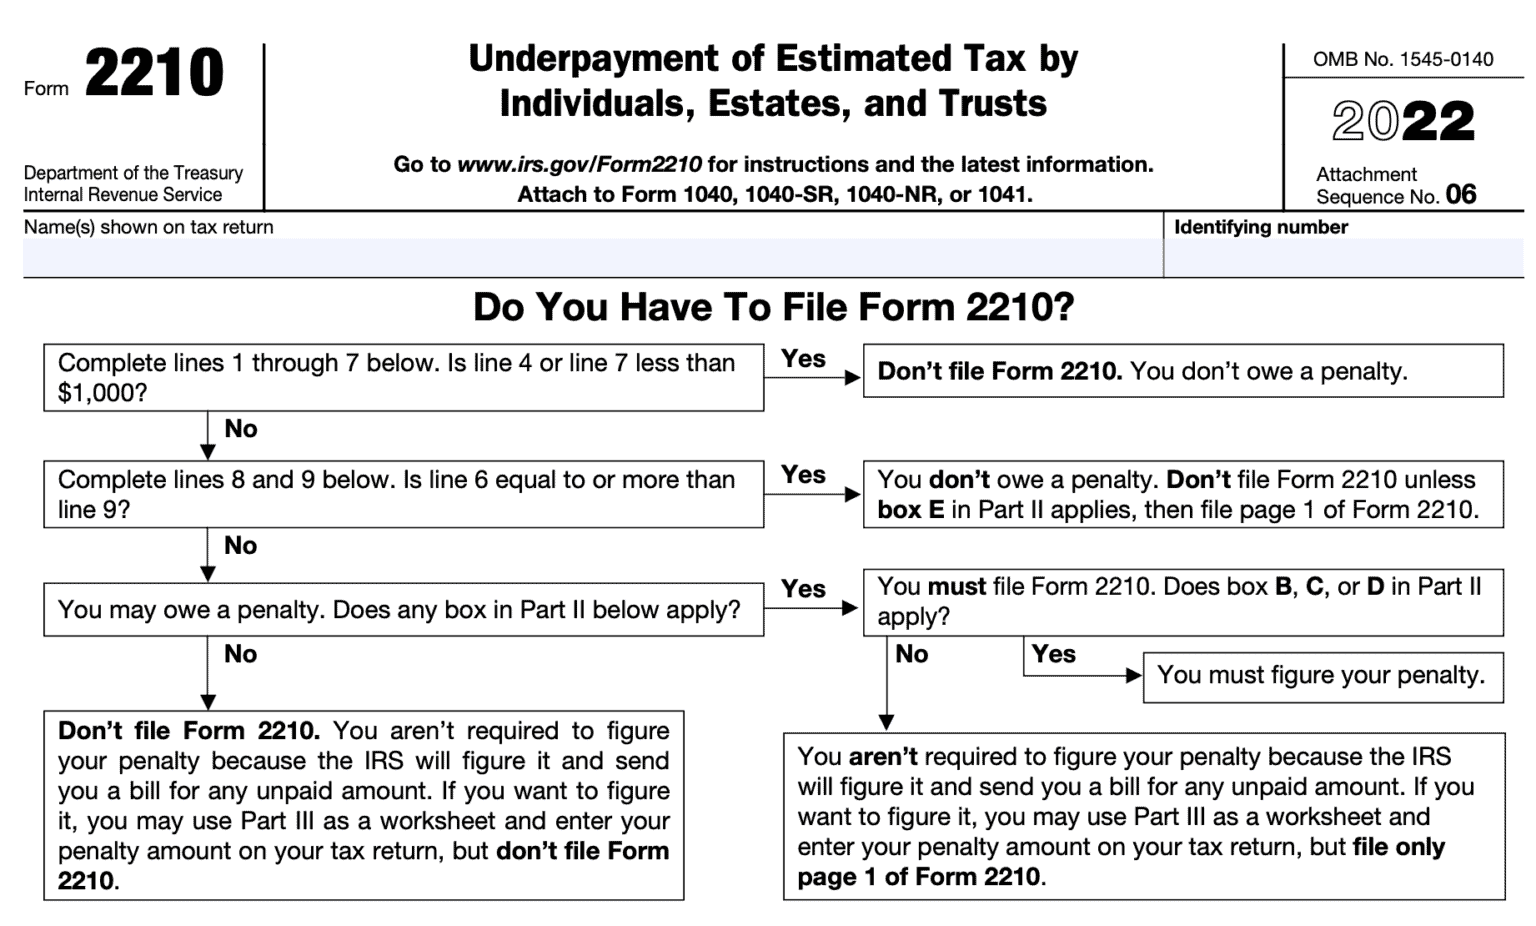 IRS Form 2210 Instructions Underpayment of Estimated Tax